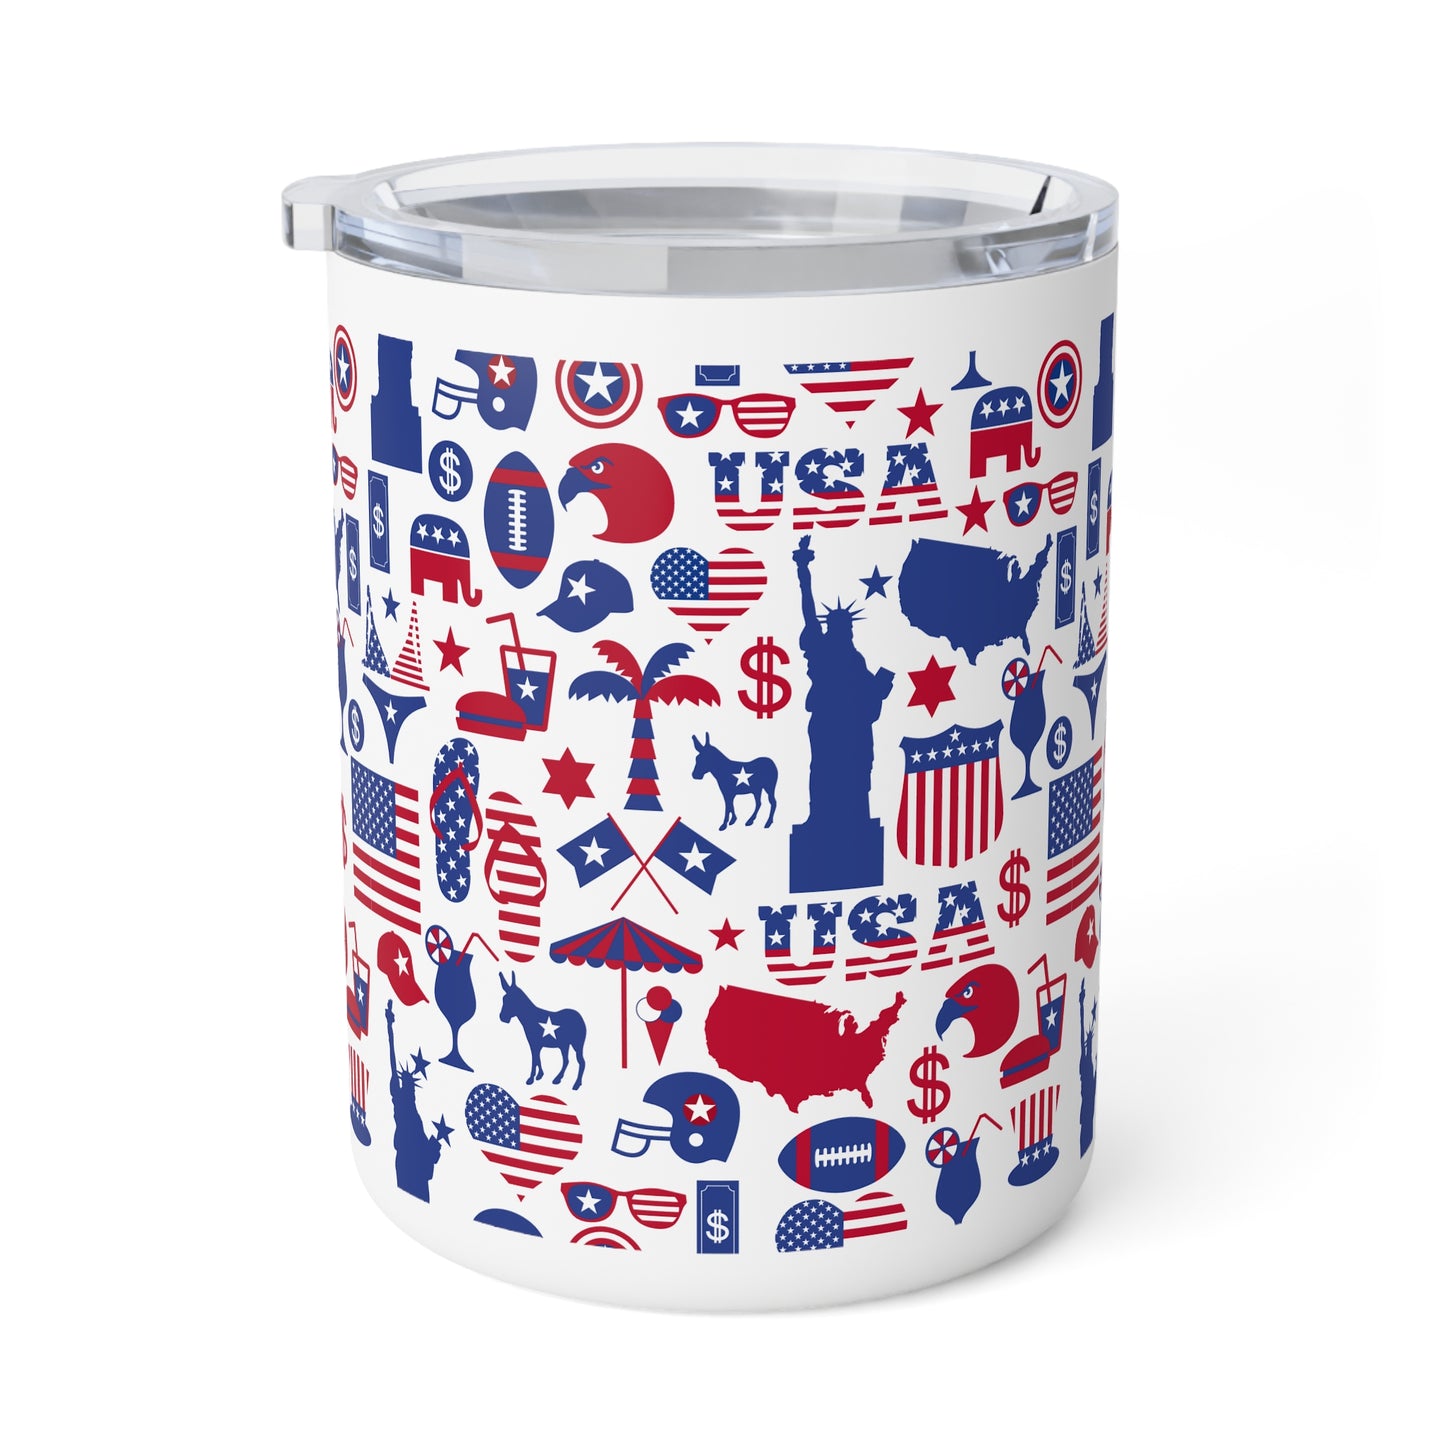 All American Red and Blue Insulated Coffee Mug, 10oz